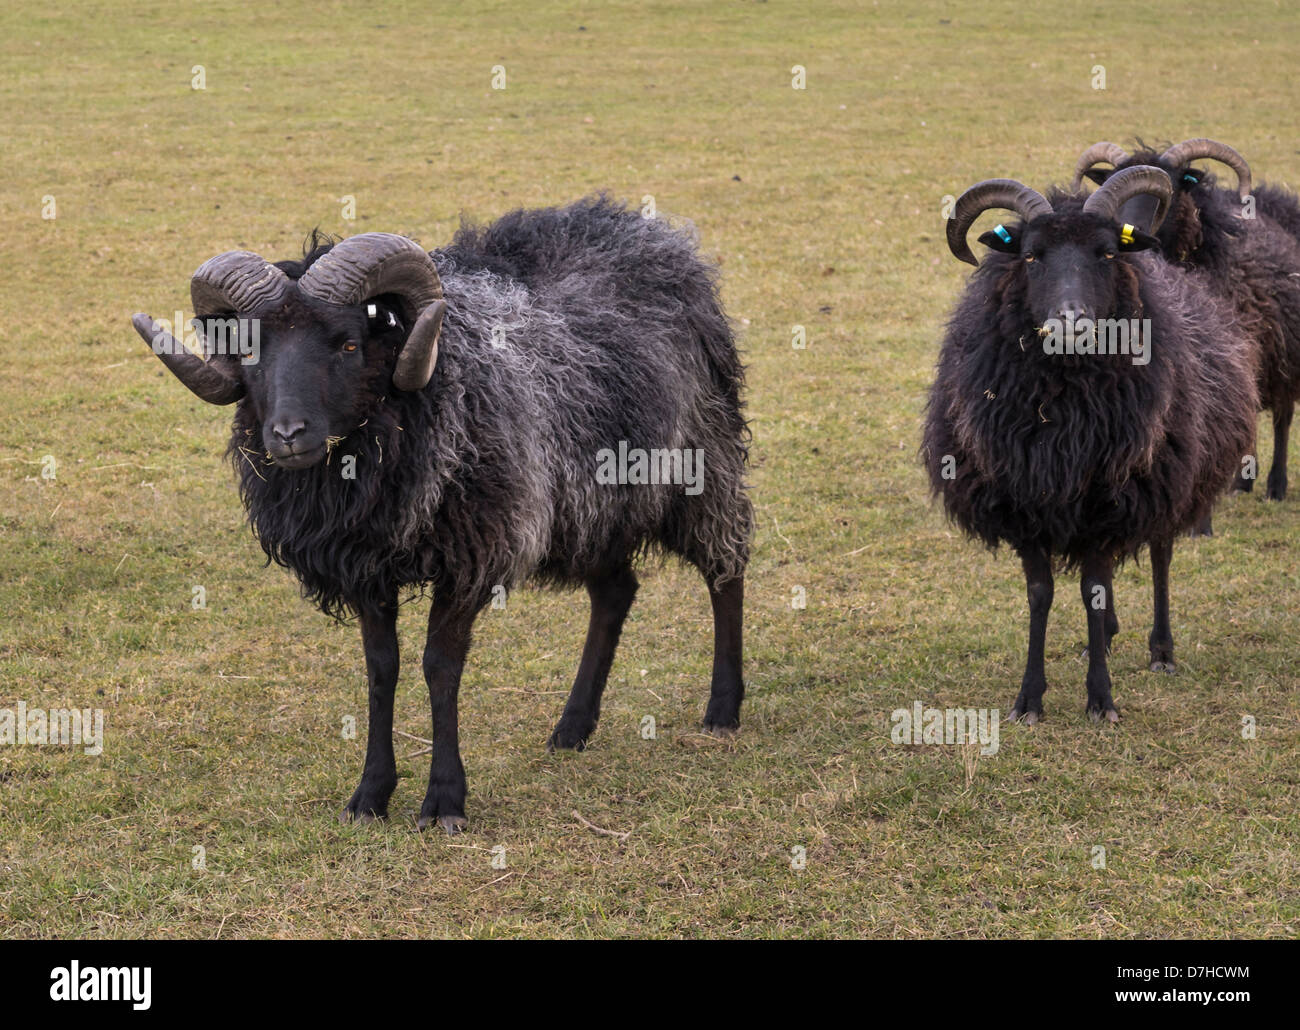 Hebridean sheep. Photograph shows a ram with two ewes. Stock Photo